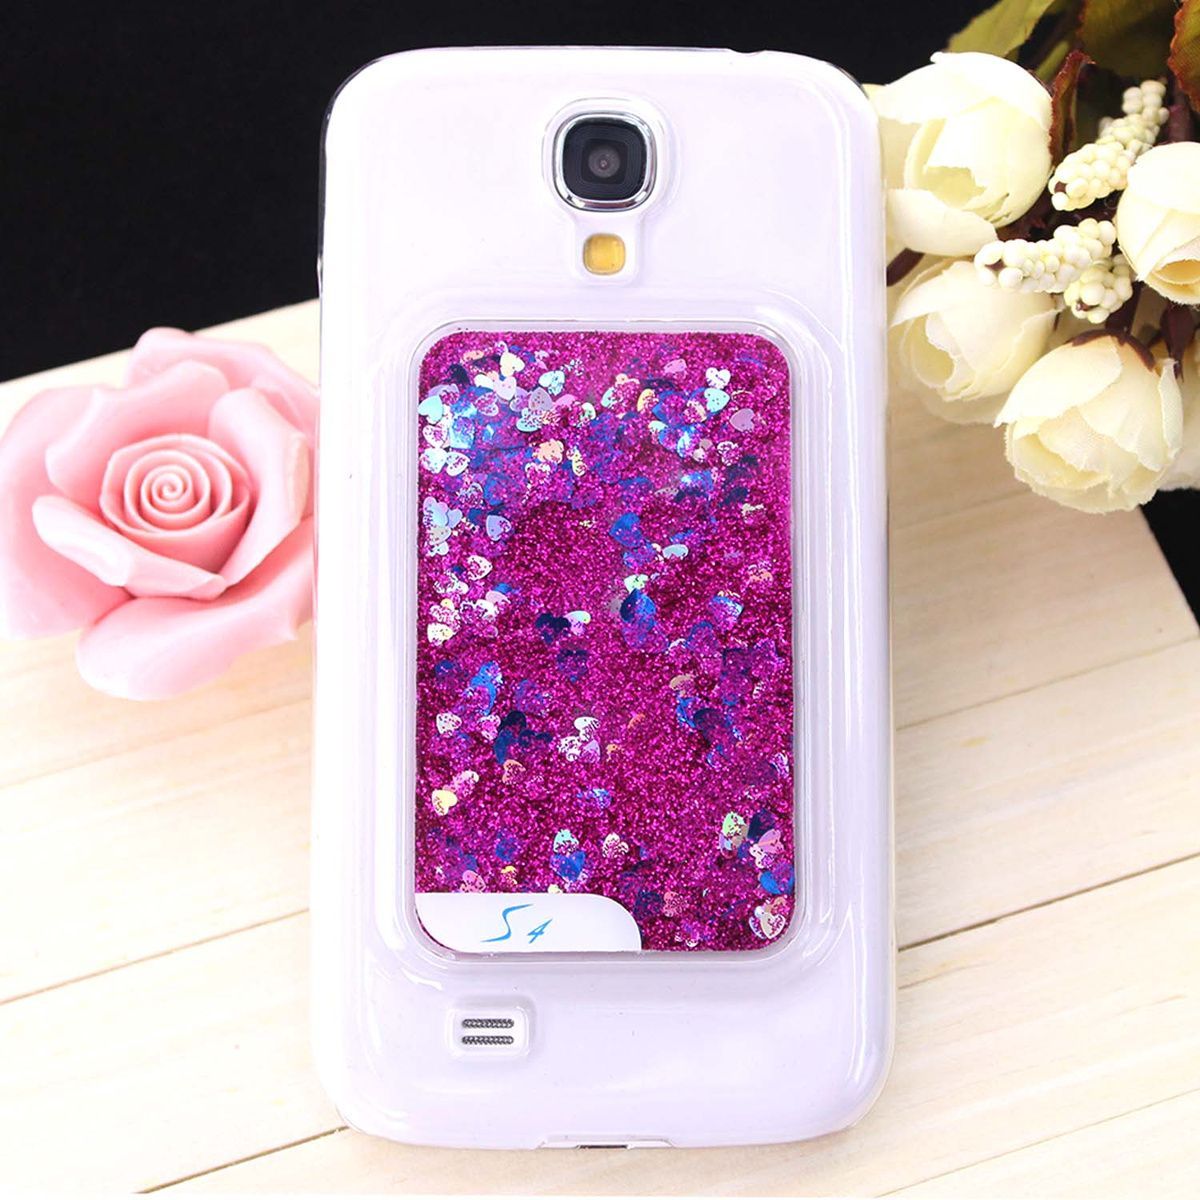 Fashion Colorful Love Pattern Plastic Case for Samsung Galaxy S4 i9500 - Rose